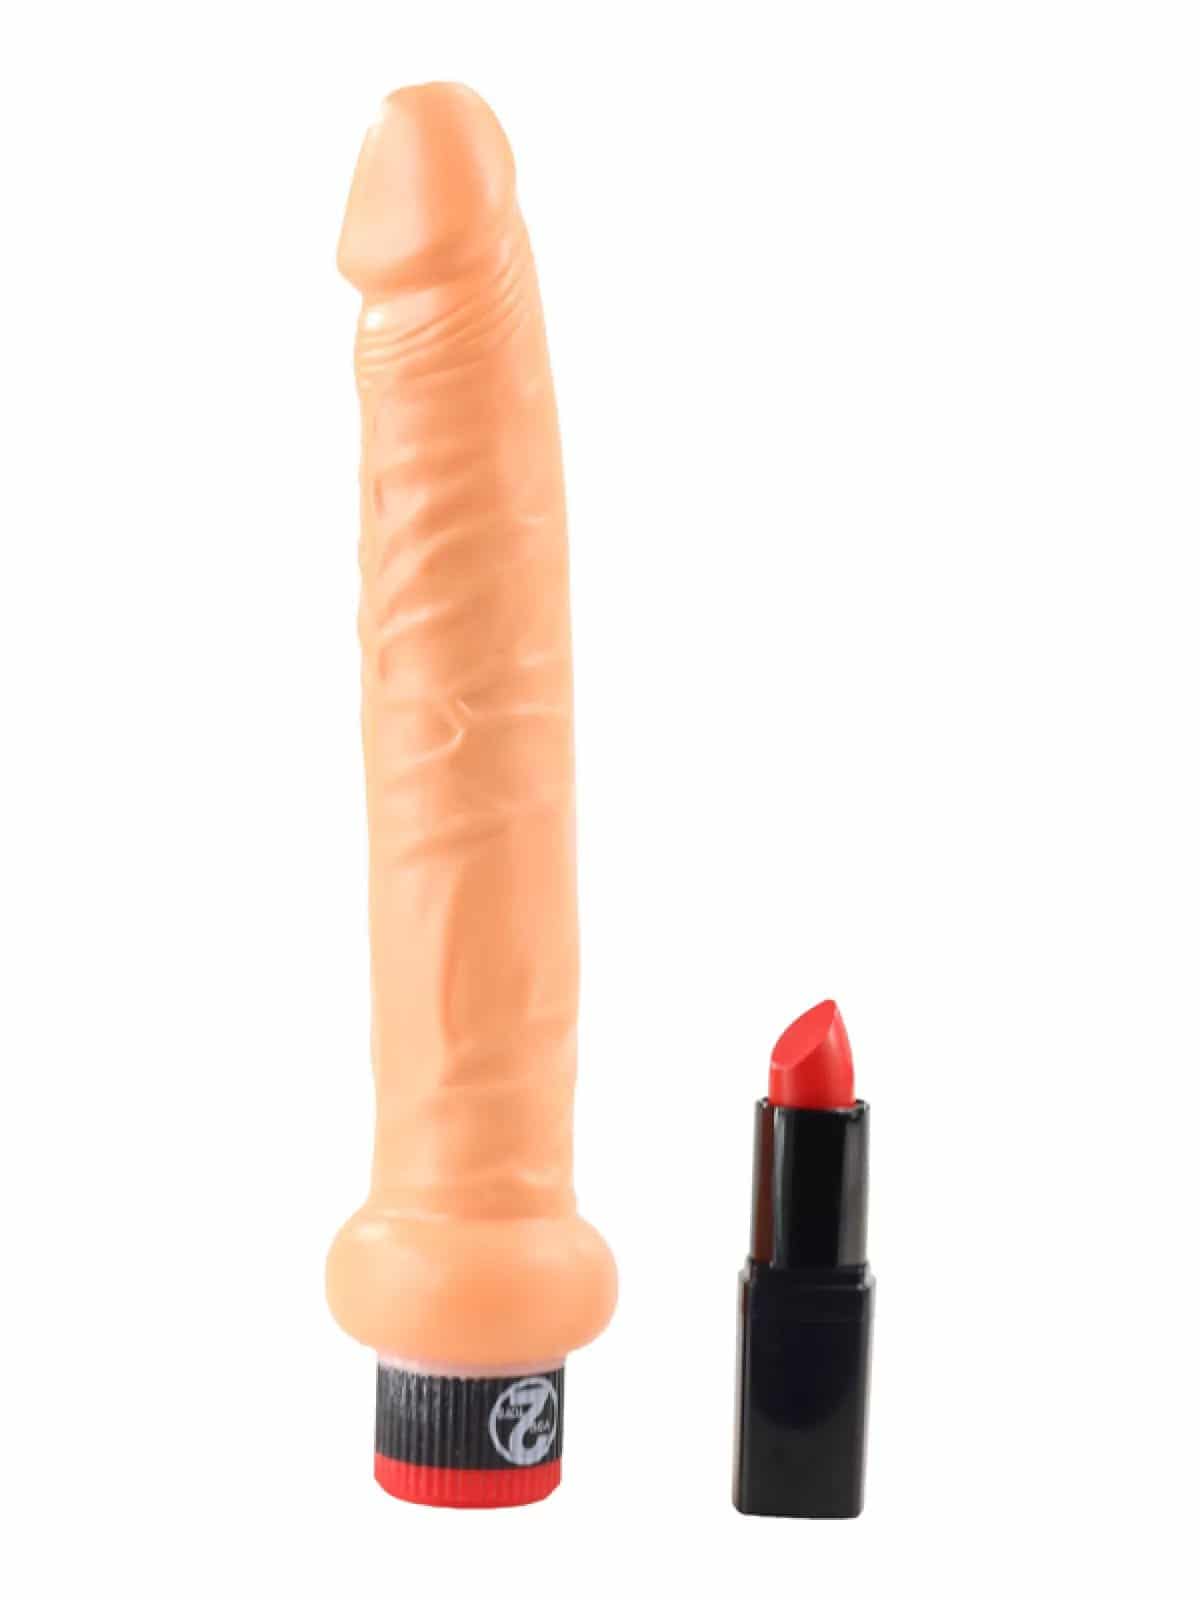 You2Toys Real Deal Anal Vibrator. Slide 2